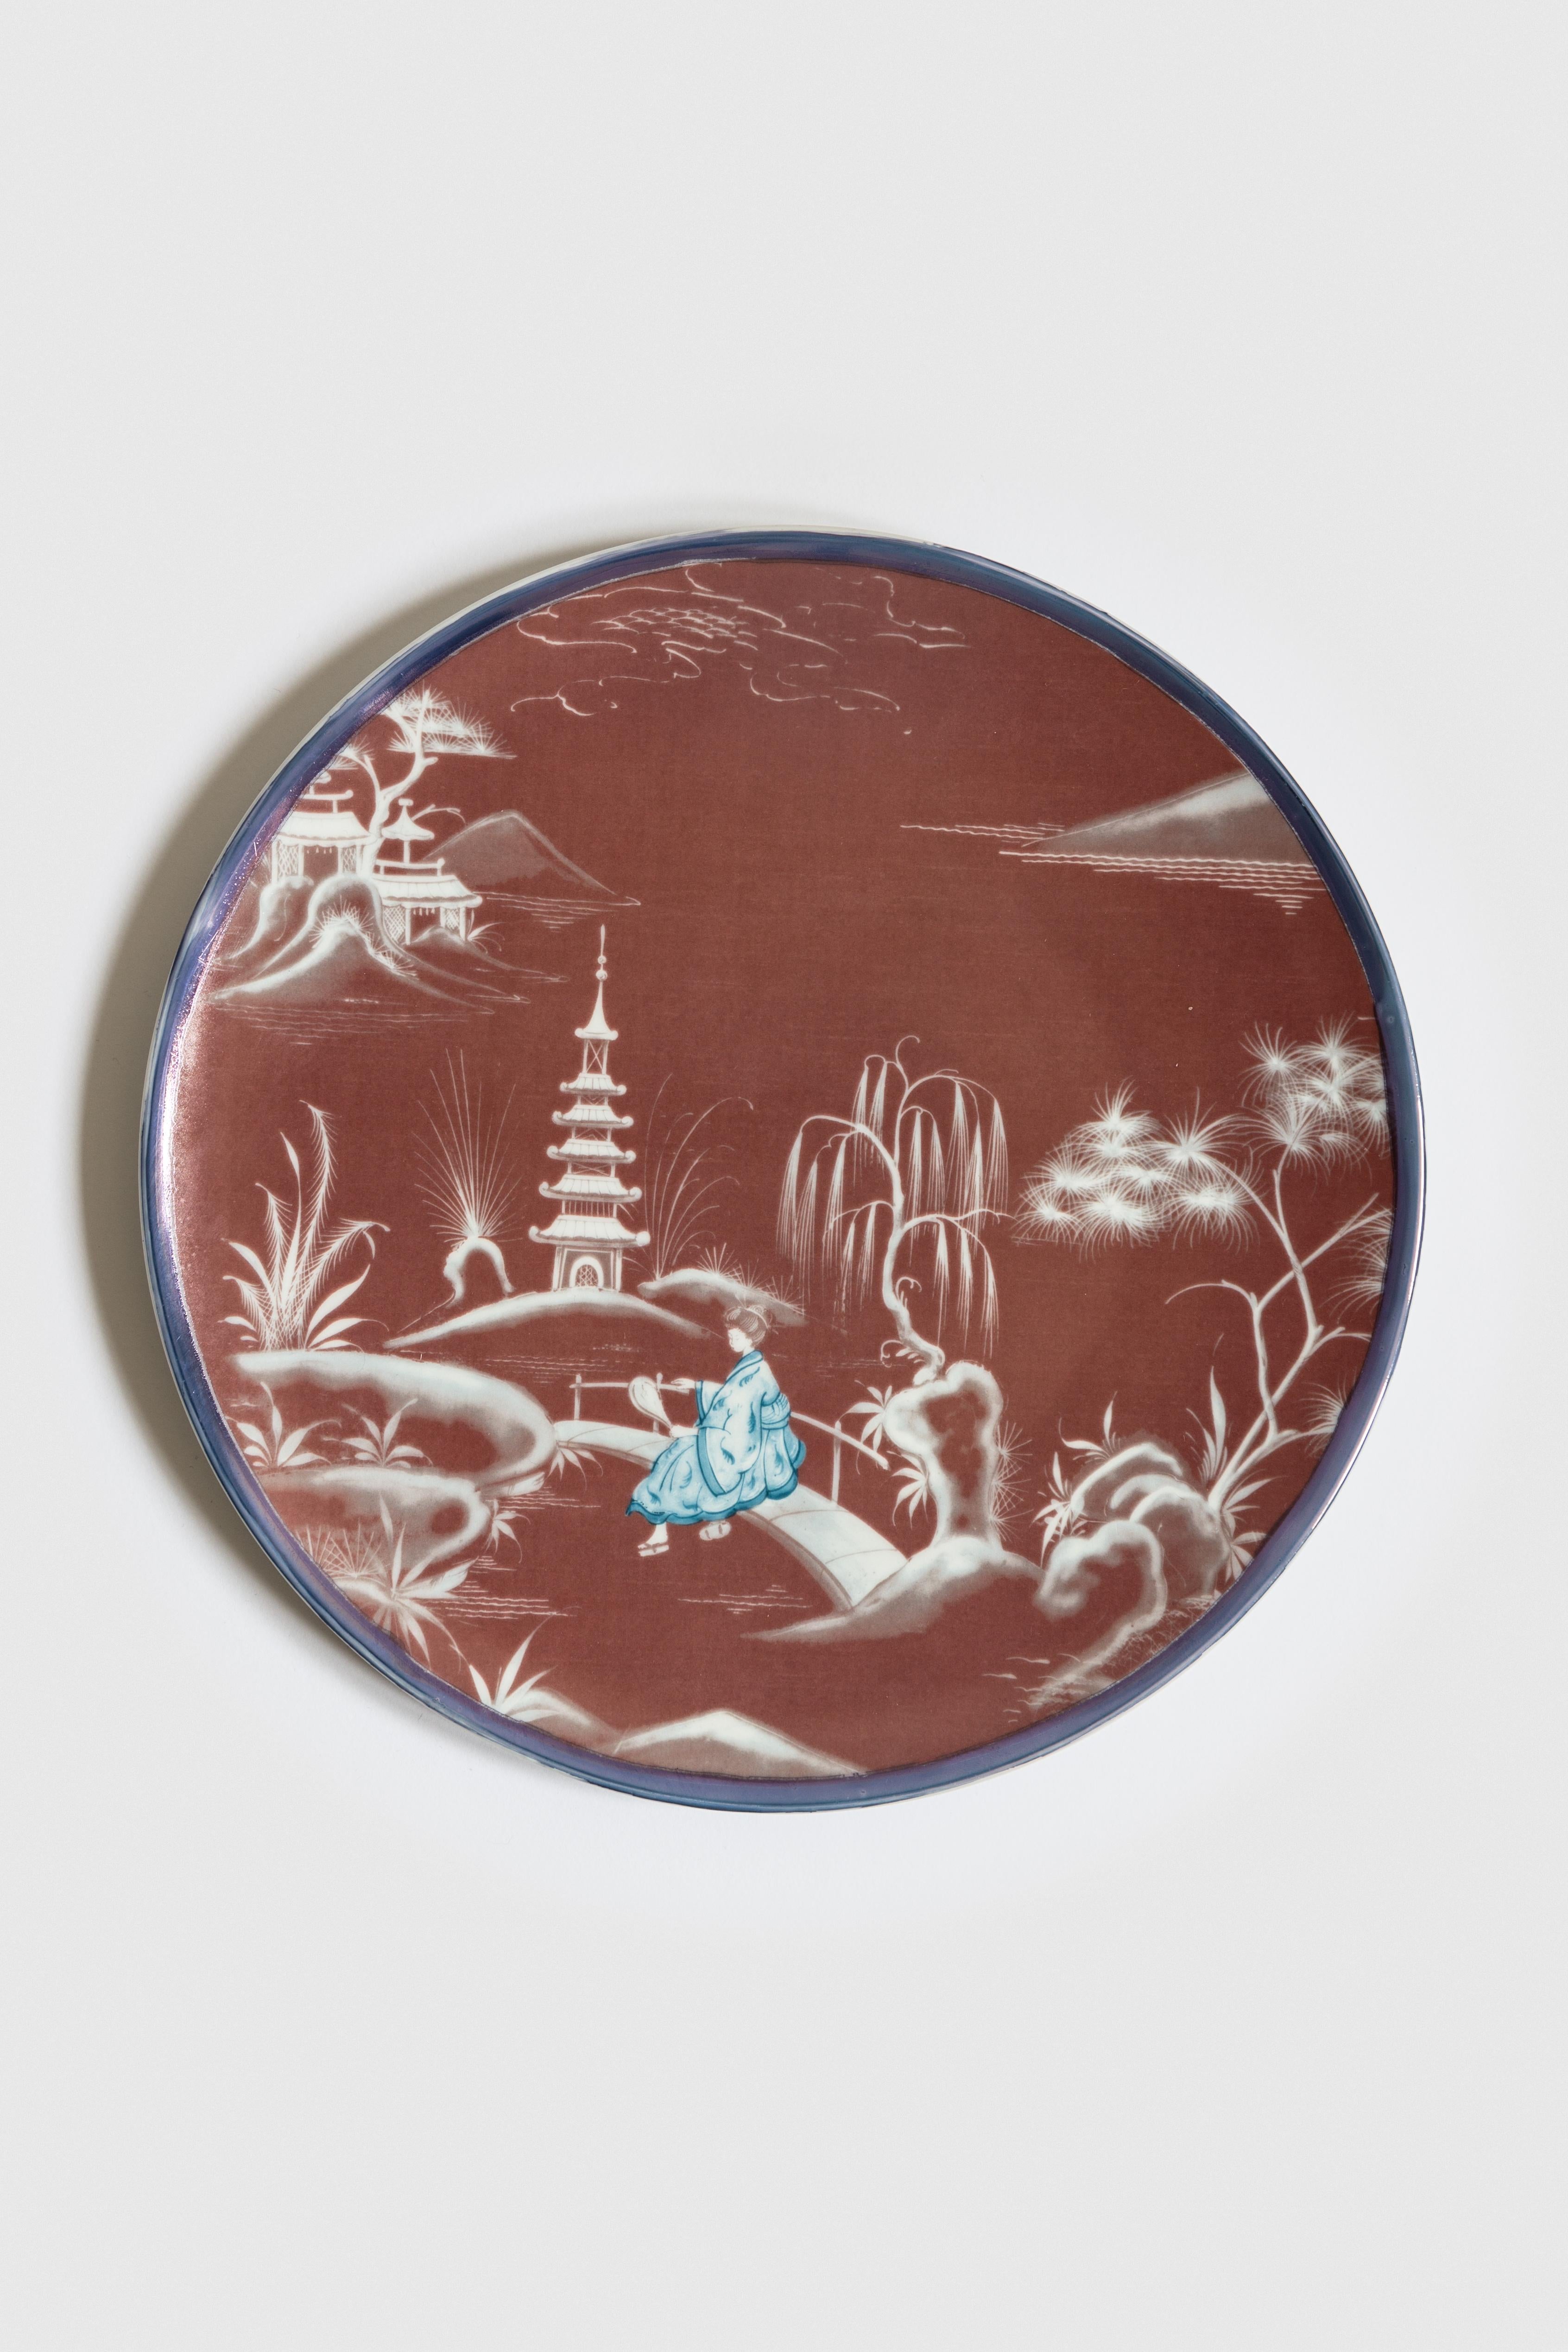 Bordeaux and blue are the primary colors of this Japan inspired collection of plates, where ancient Japanese scenes take place on the rivers of a fairy lake.